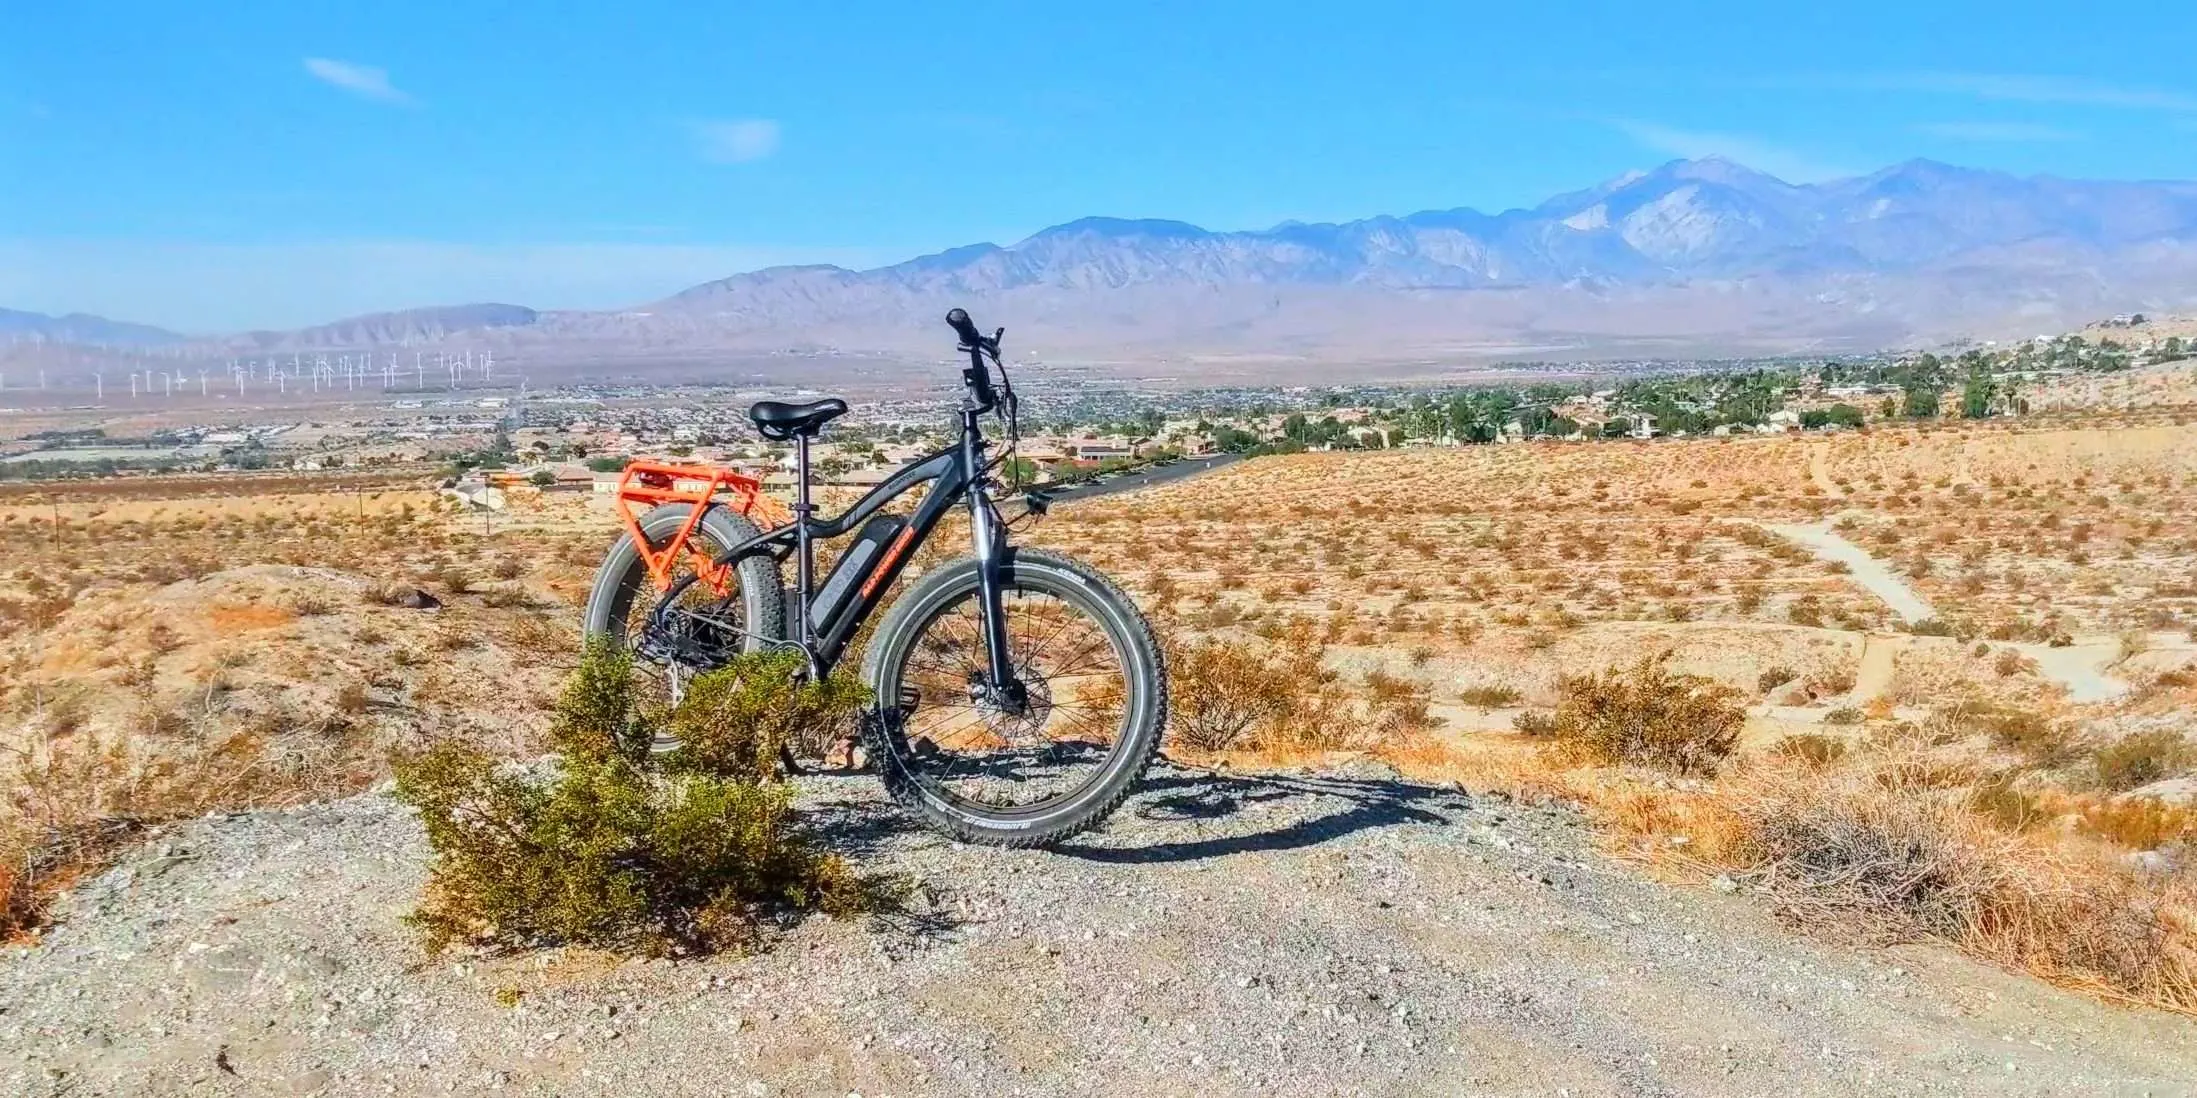 Bike parked in the desert in front of mountains.